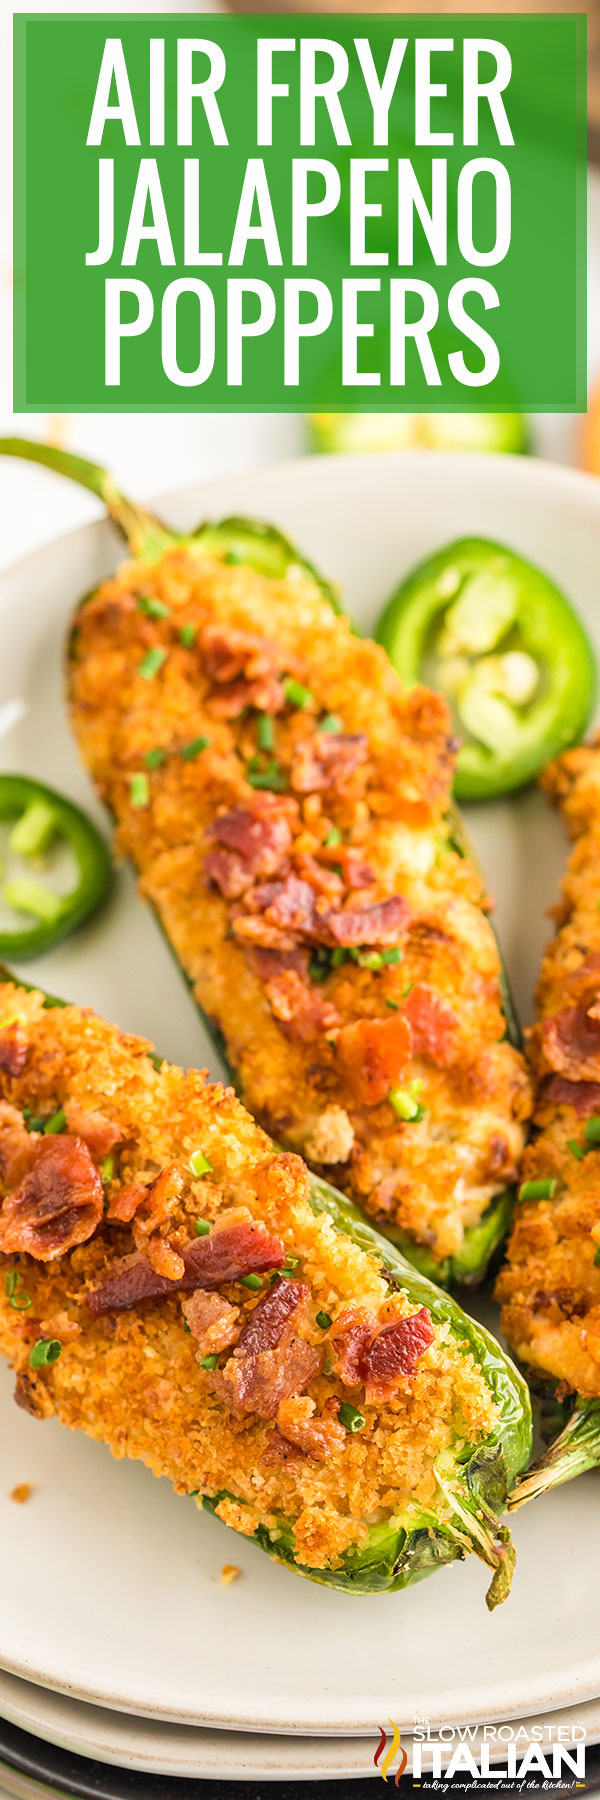 titled image (and shown): jalapeno poppers air fryer recipe